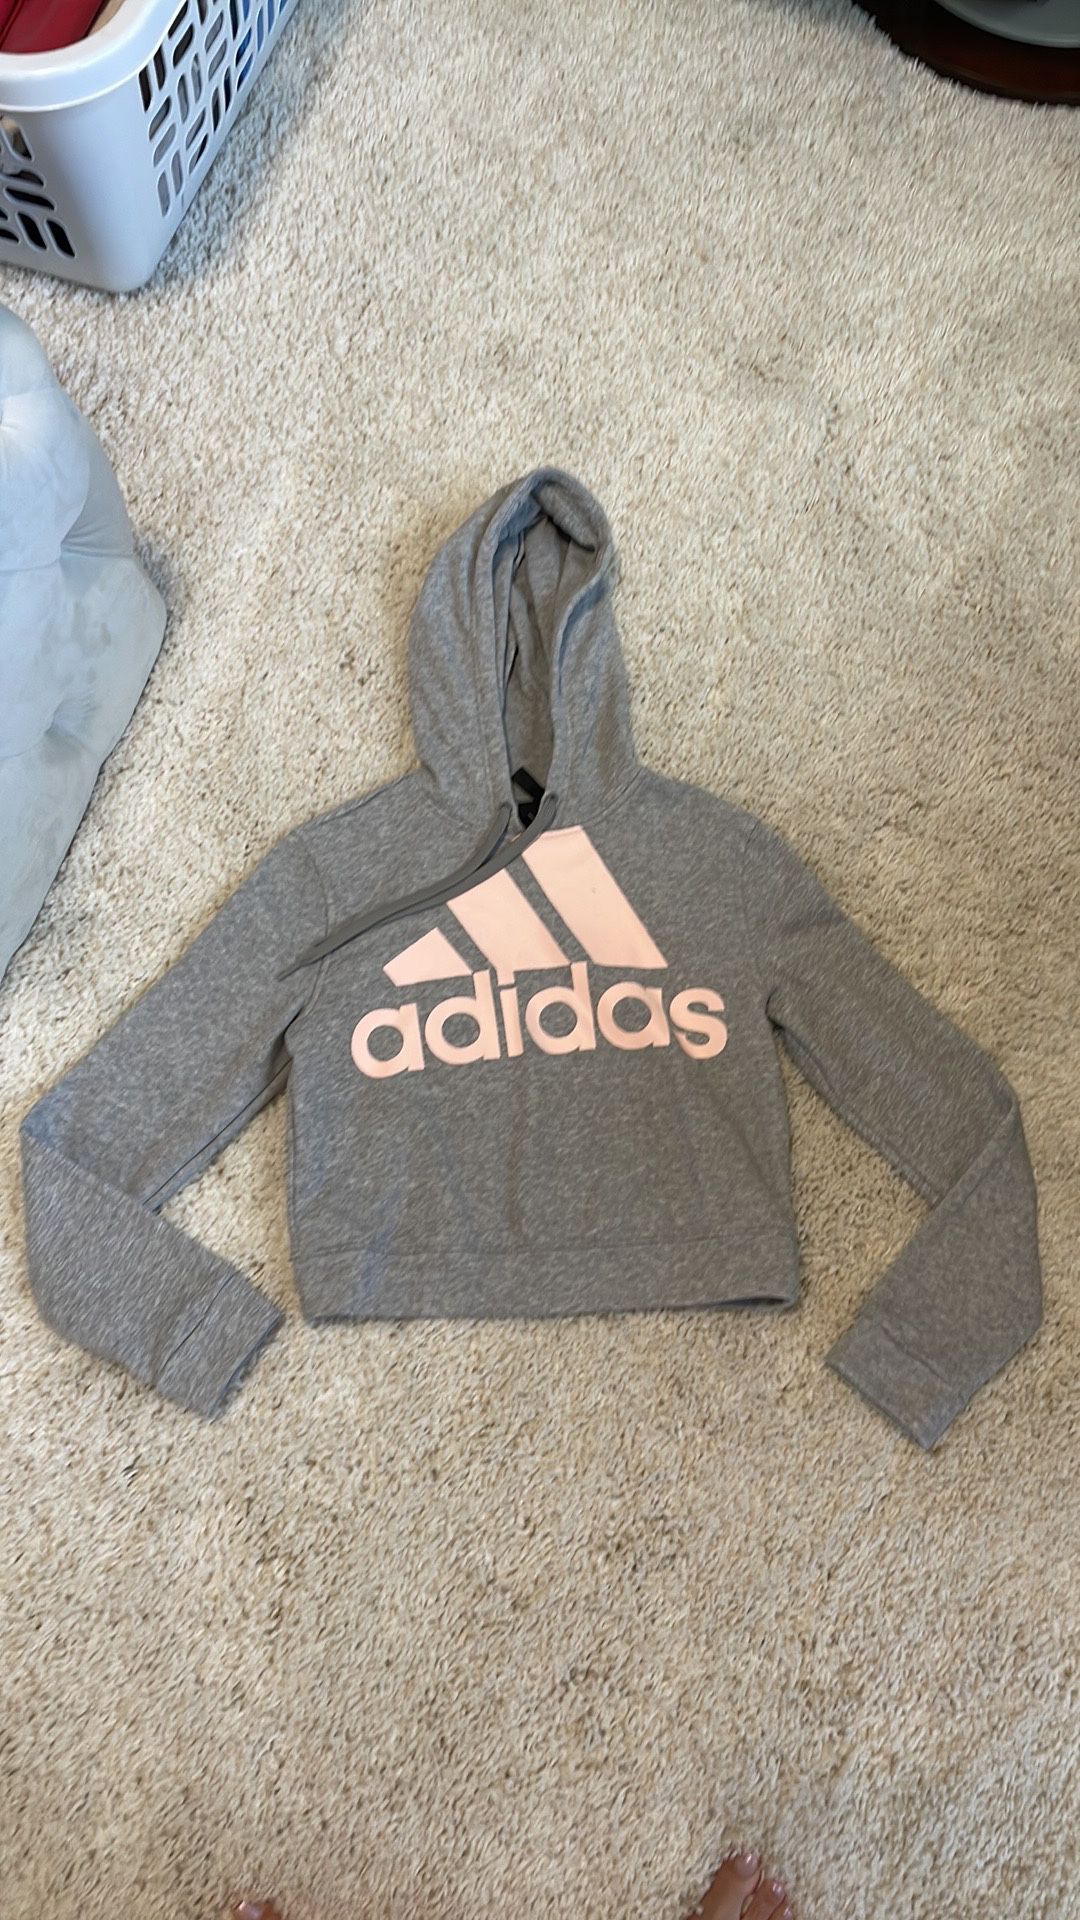 Women’s crop hoodie sweatshirt gray light pink salmon color adidas size small. Worn once no piling. Has a small flaw as shown